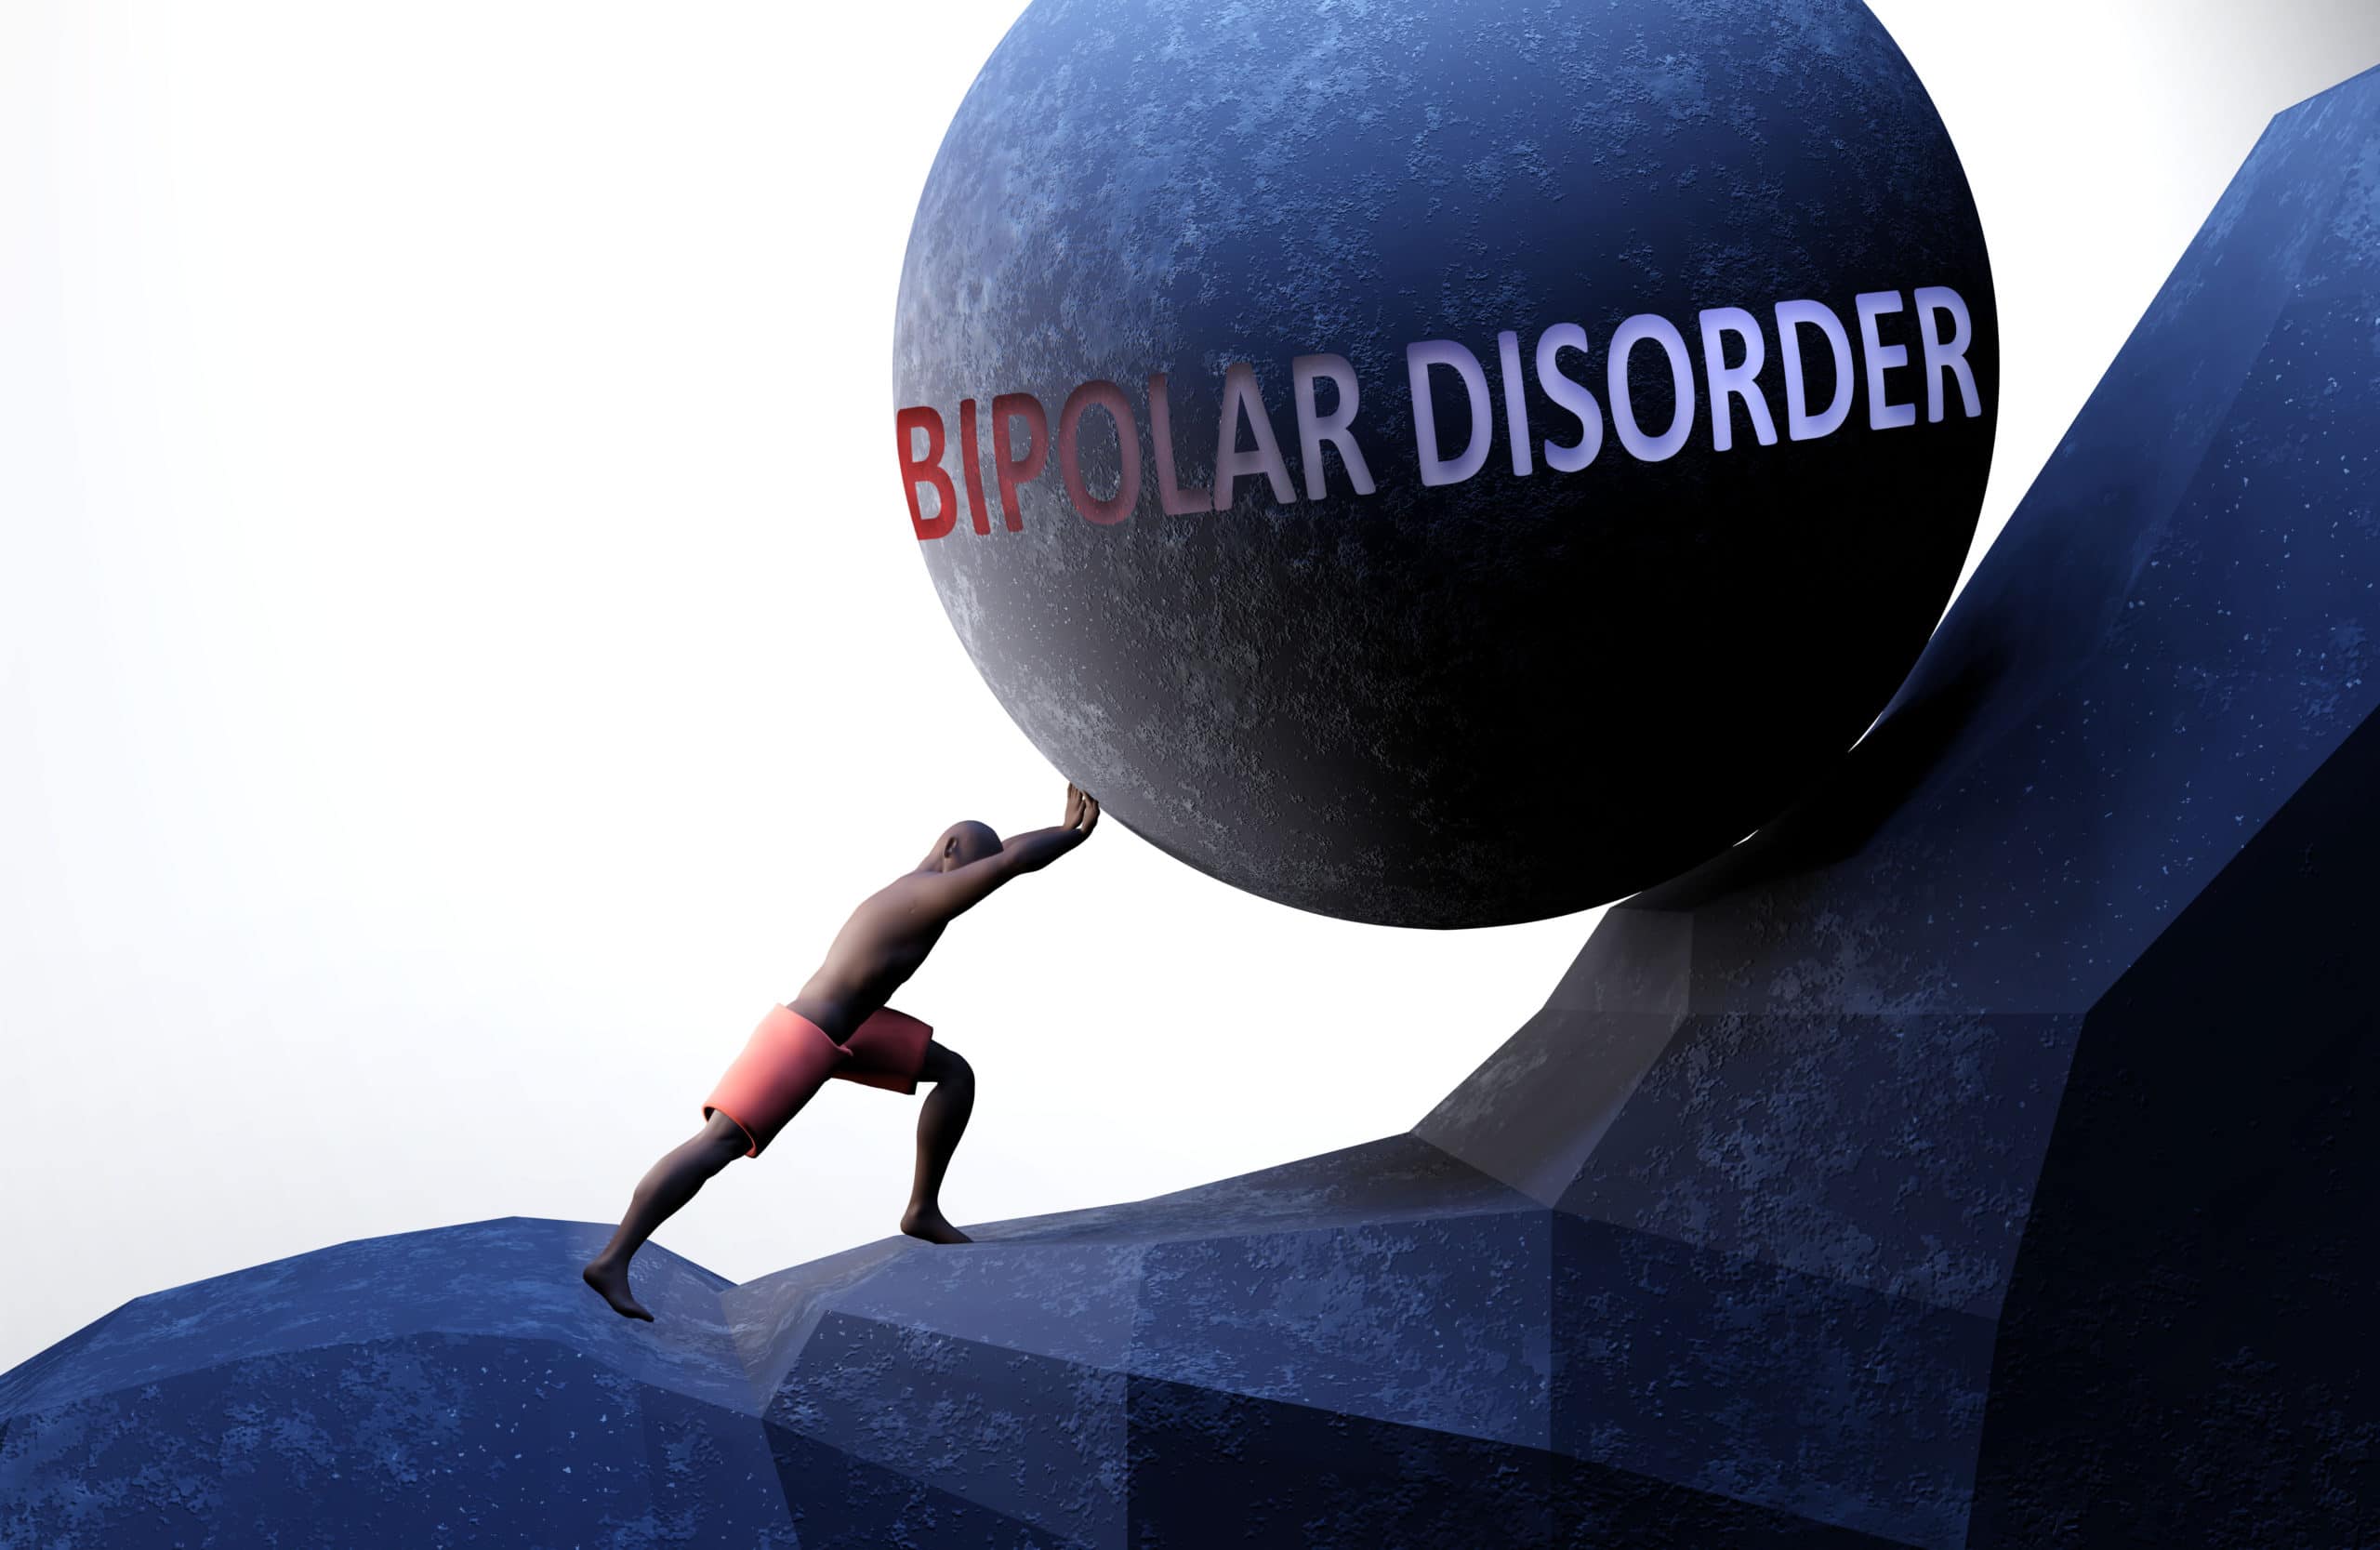 Bipolar disorder as a problem that makes life harder - symbolize